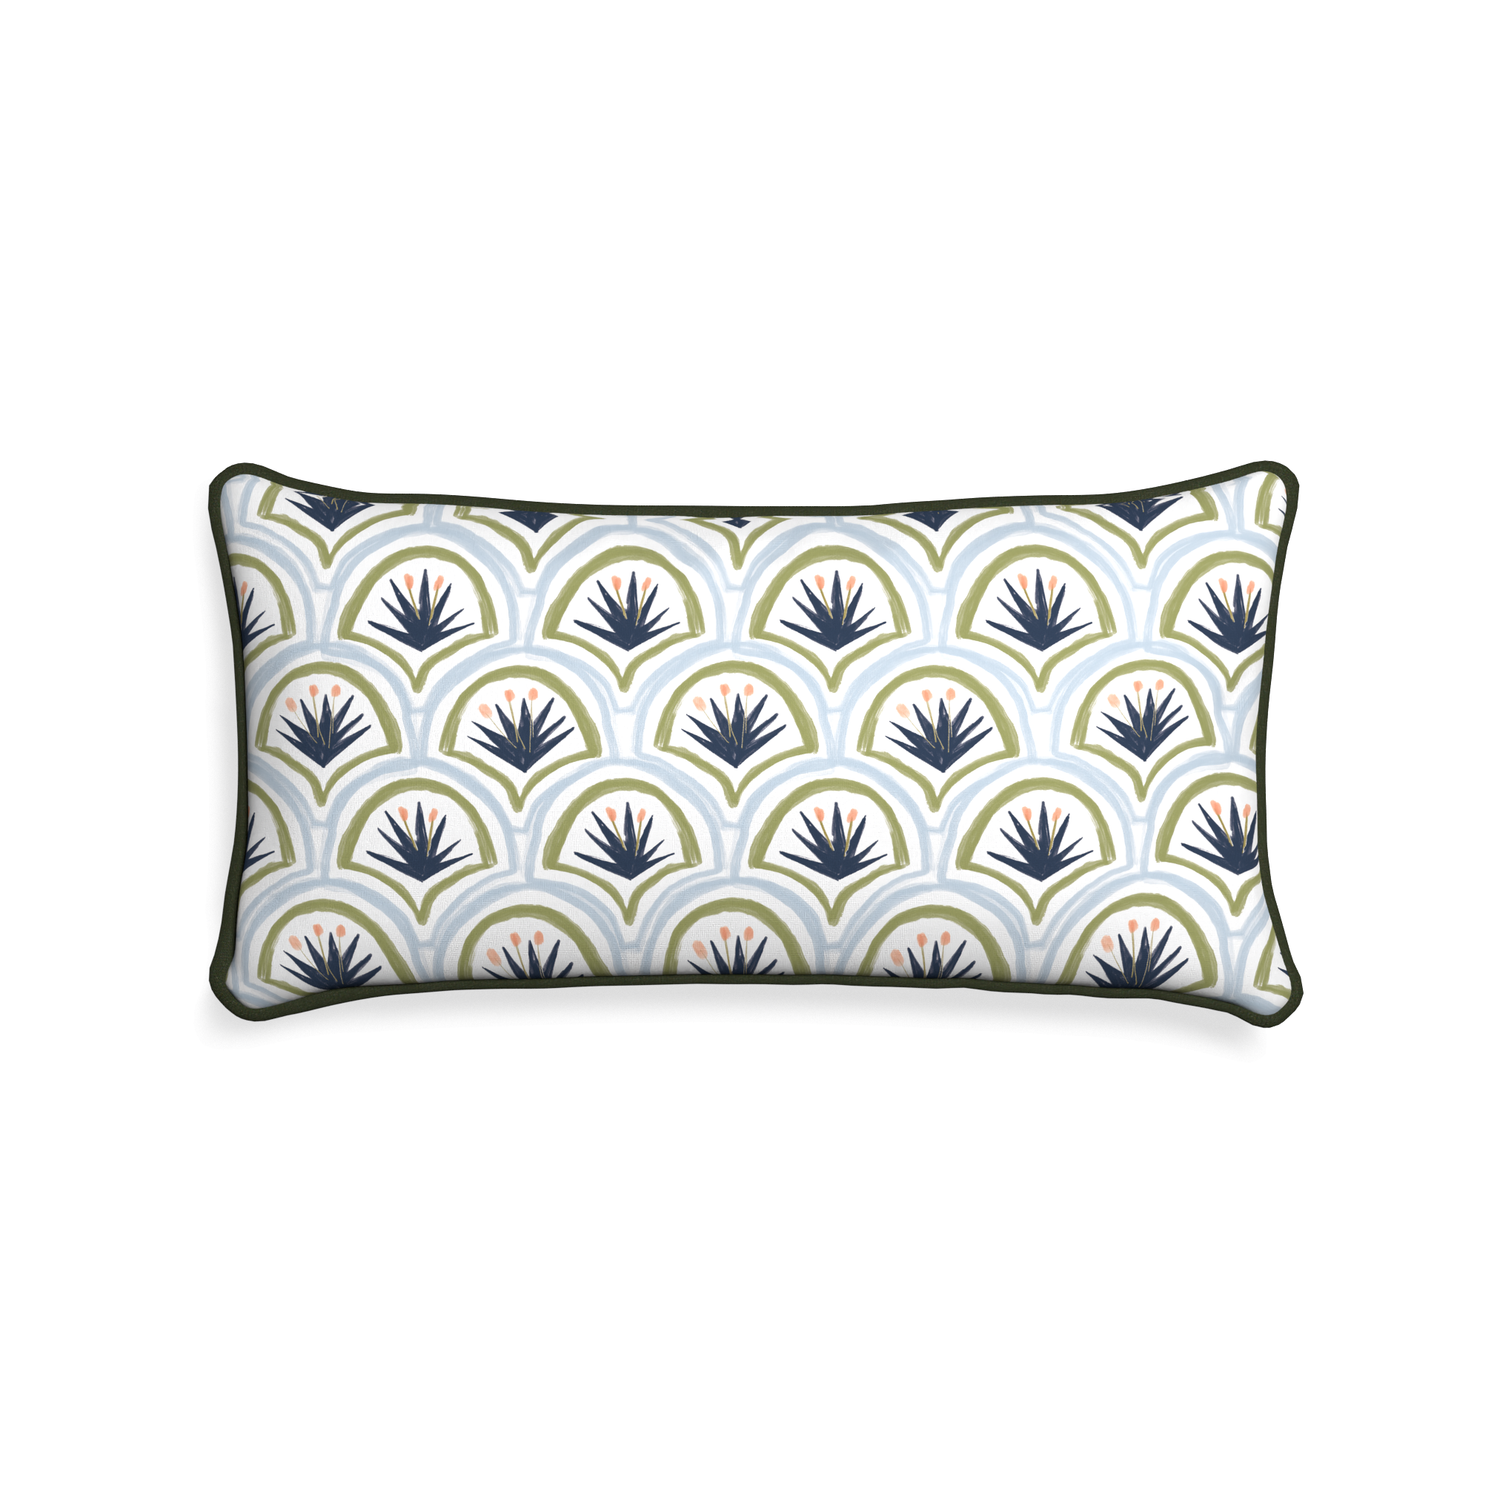 Midi-lumbar thatcher midnight custom art deco palm patternpillow with f piping on white background